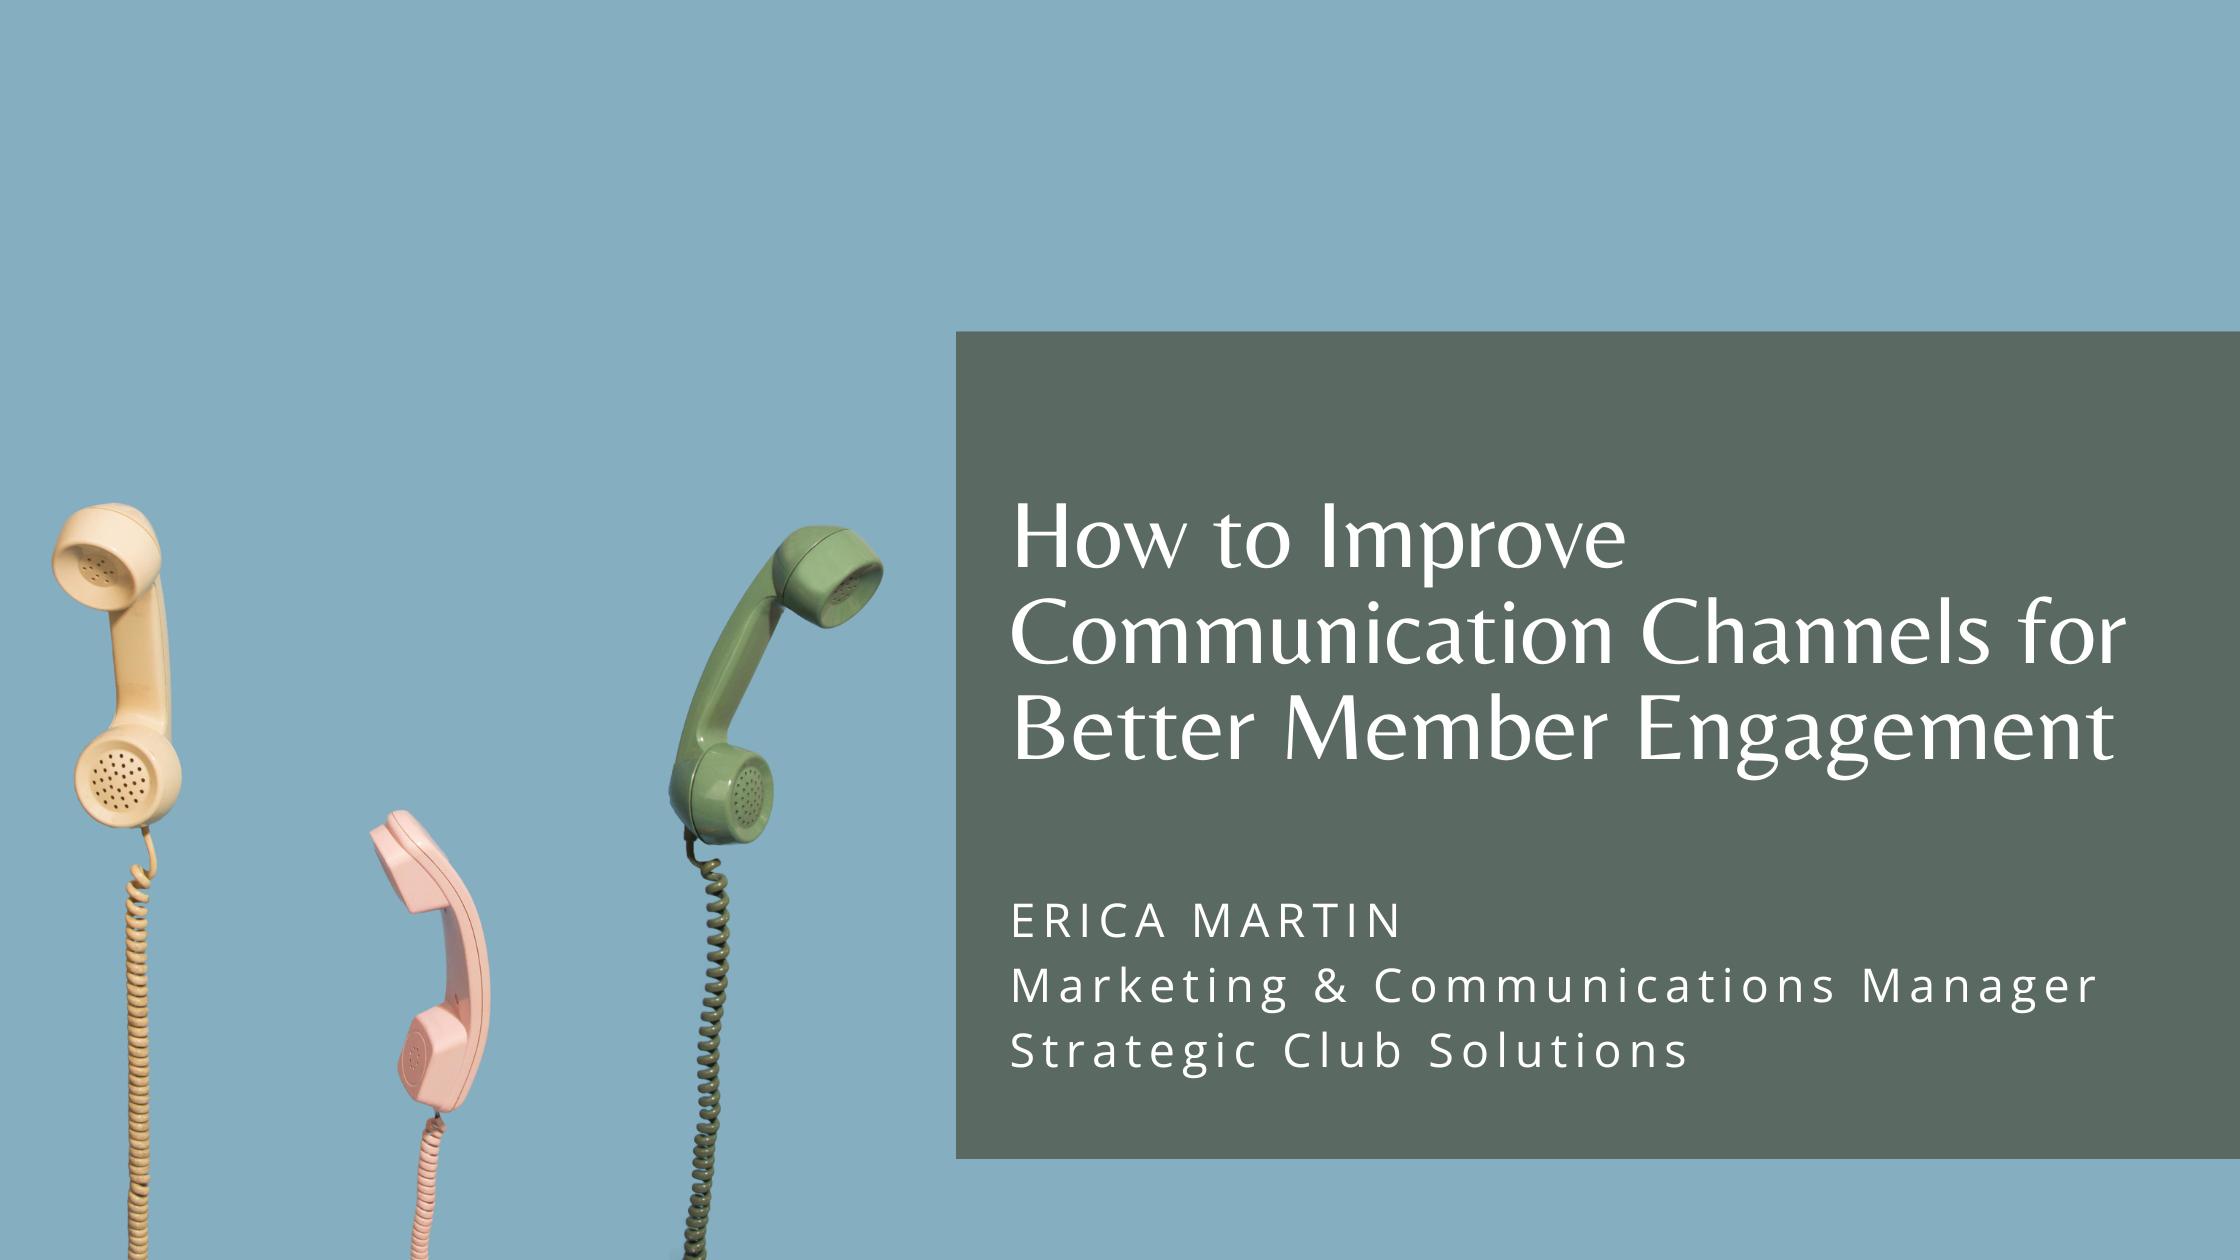 How to Improve Communication Channels for Better Member Engagement